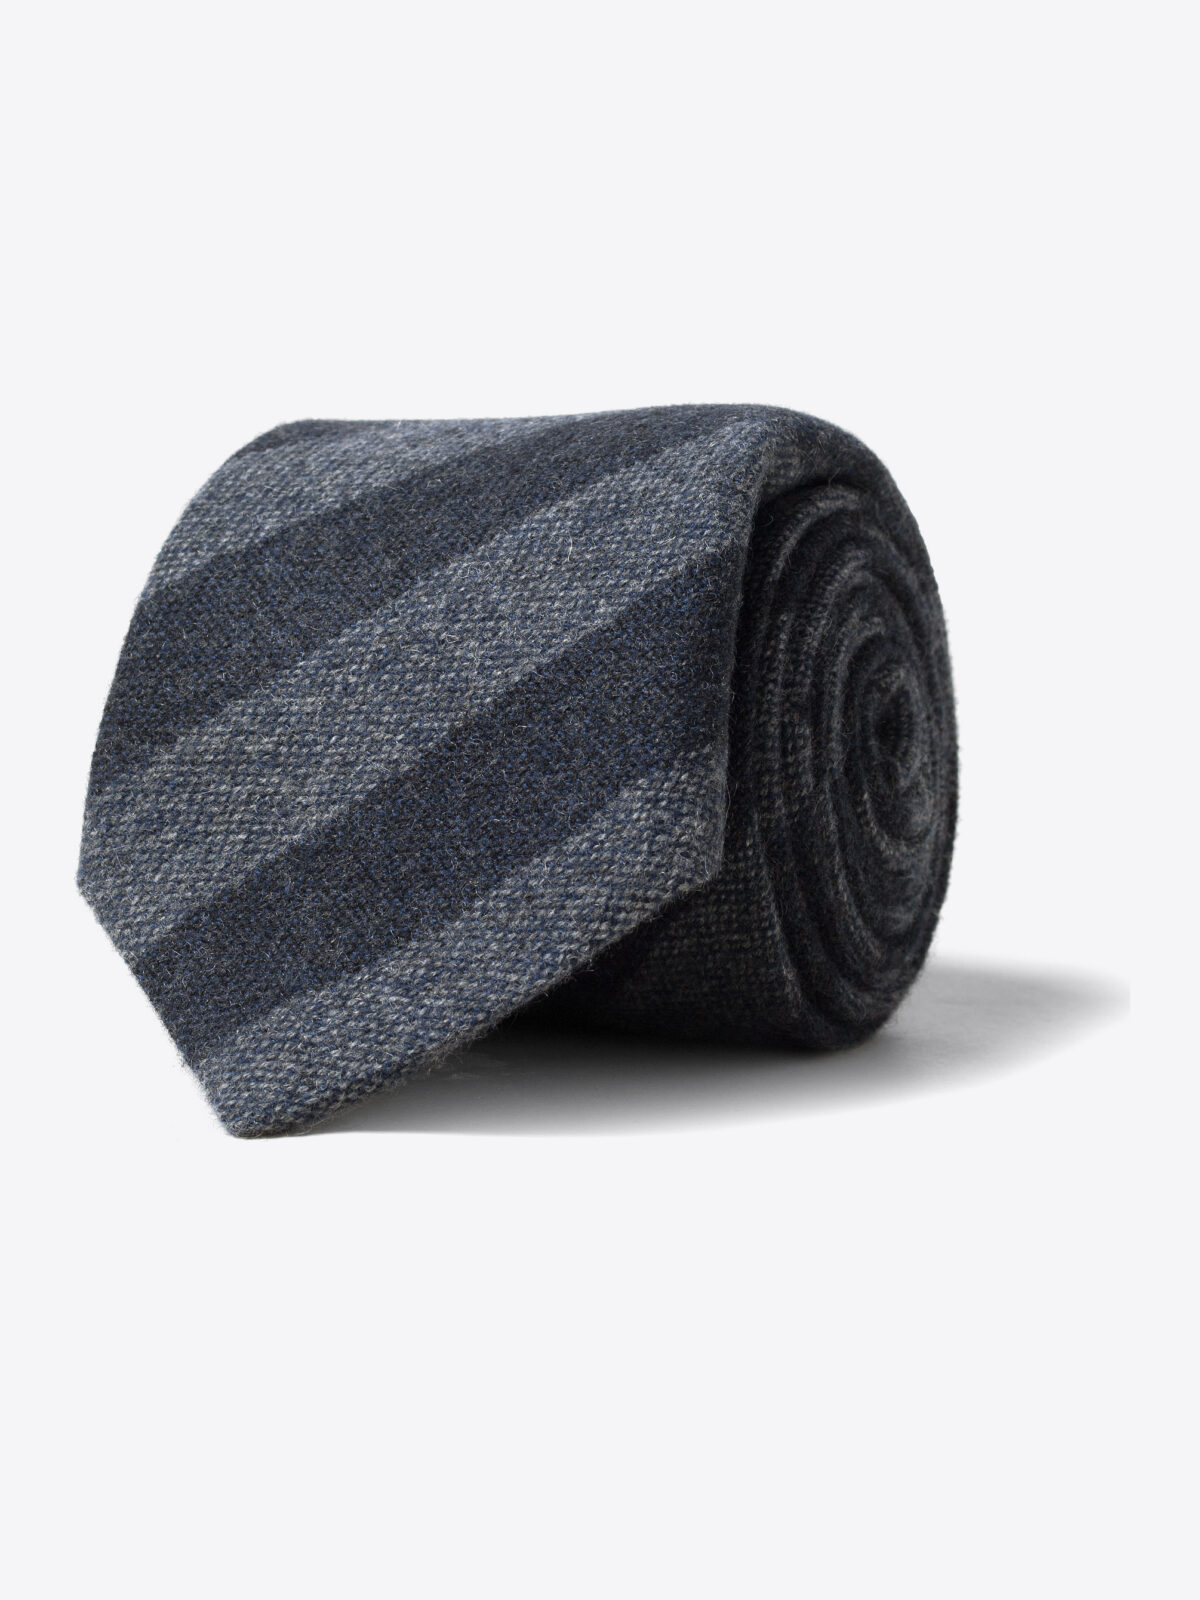 Grey and Charcoal Striped Cashmere Tie